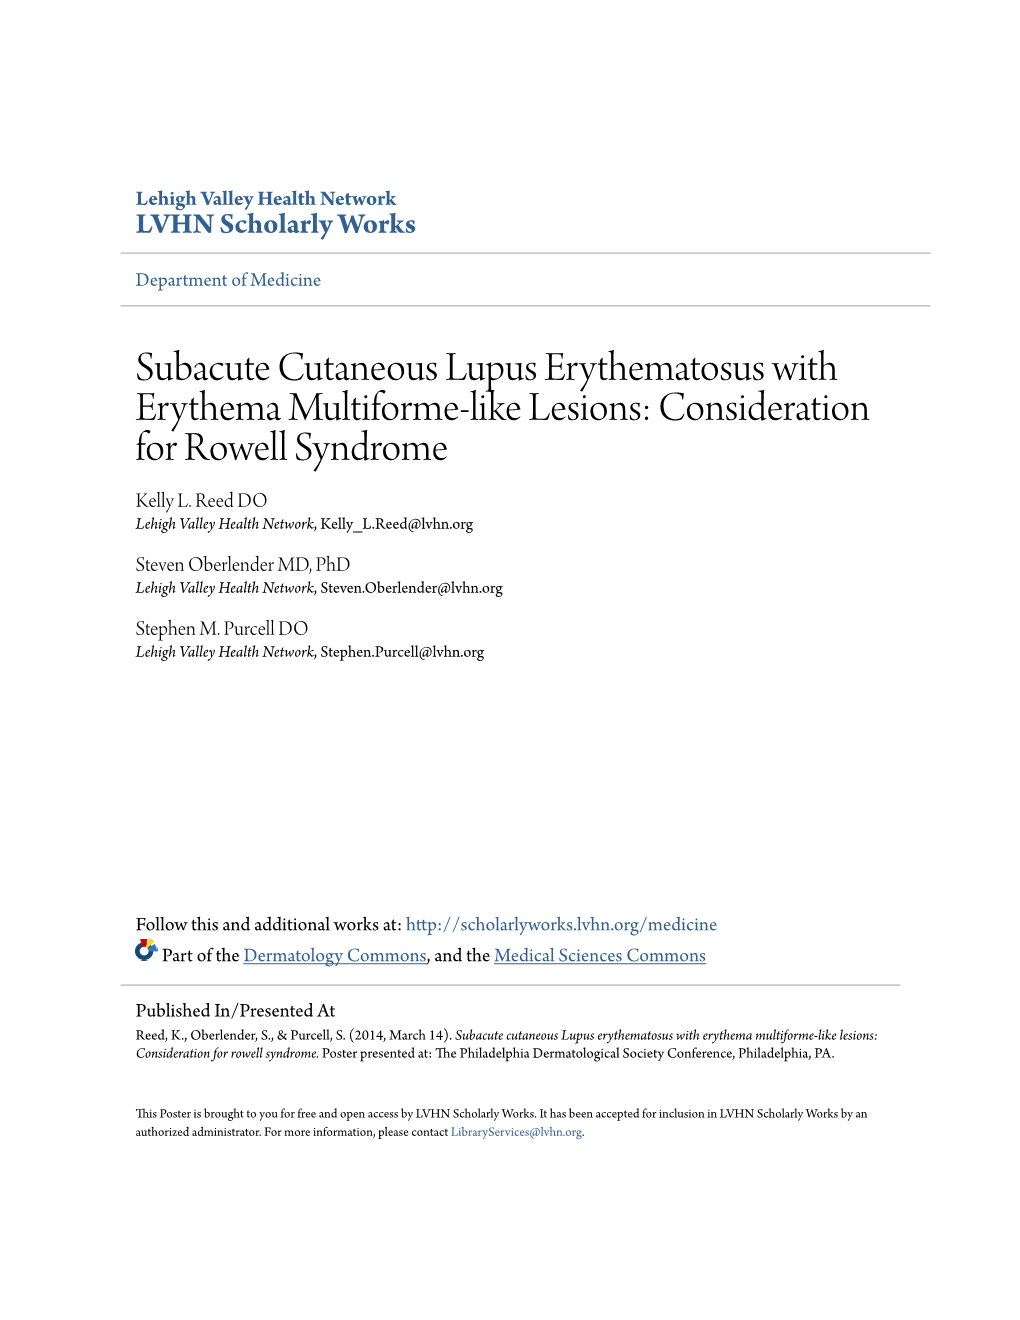 Subacute Cutaneous Lupus Erythematosus with Erythema Multiforme-Like Lesions: Consideration for Rowell Syndrome Kelly L